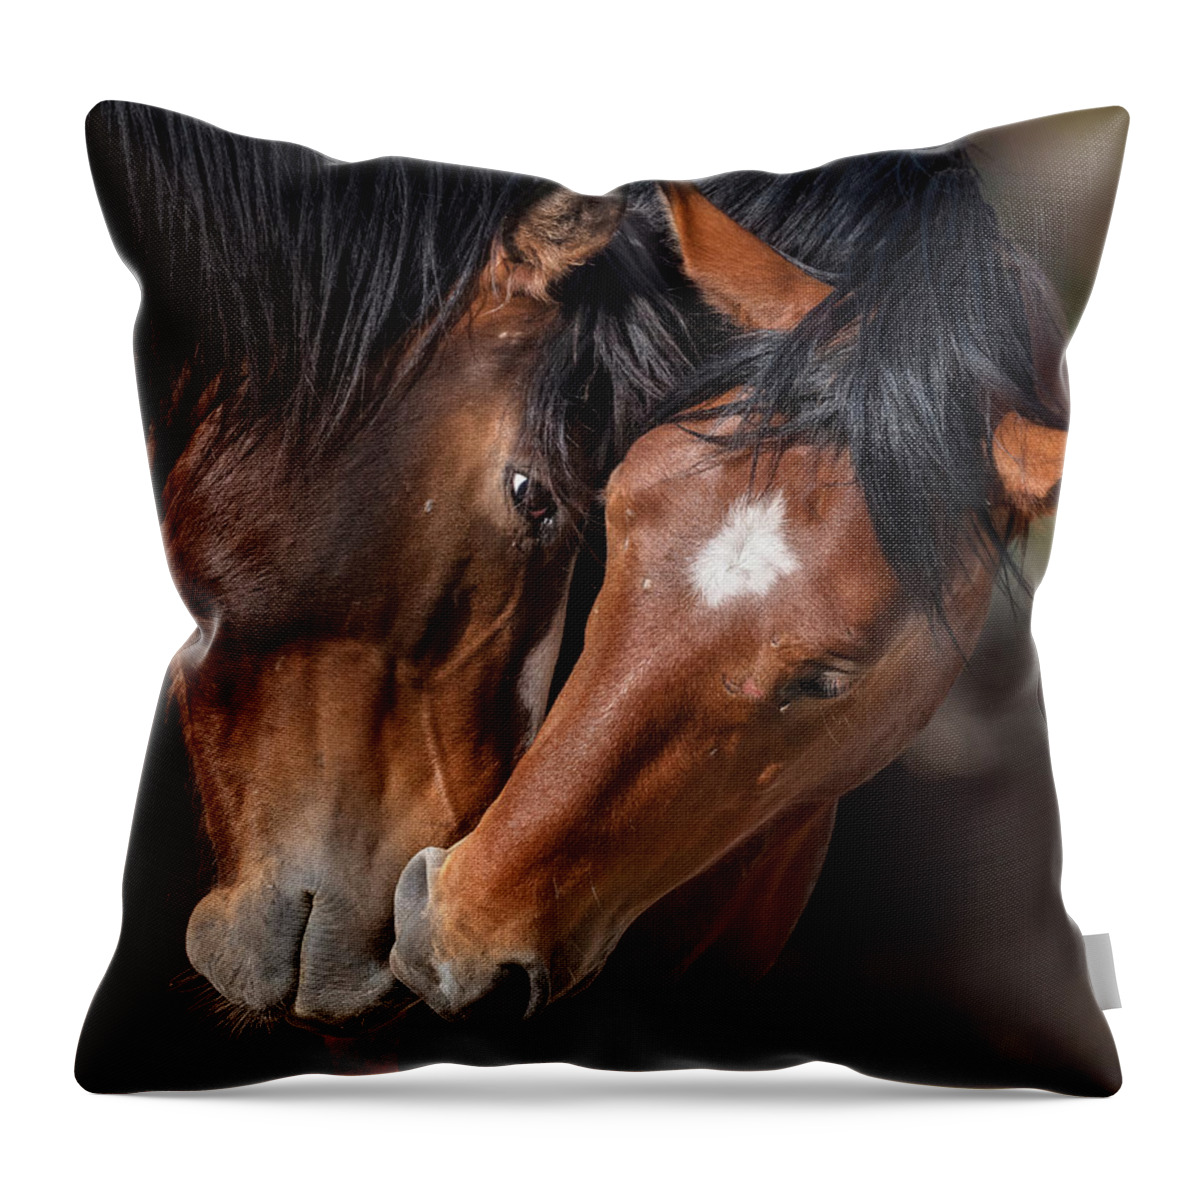 Stallion Throw Pillow featuring the photograph The Gaze. by Paul Martin